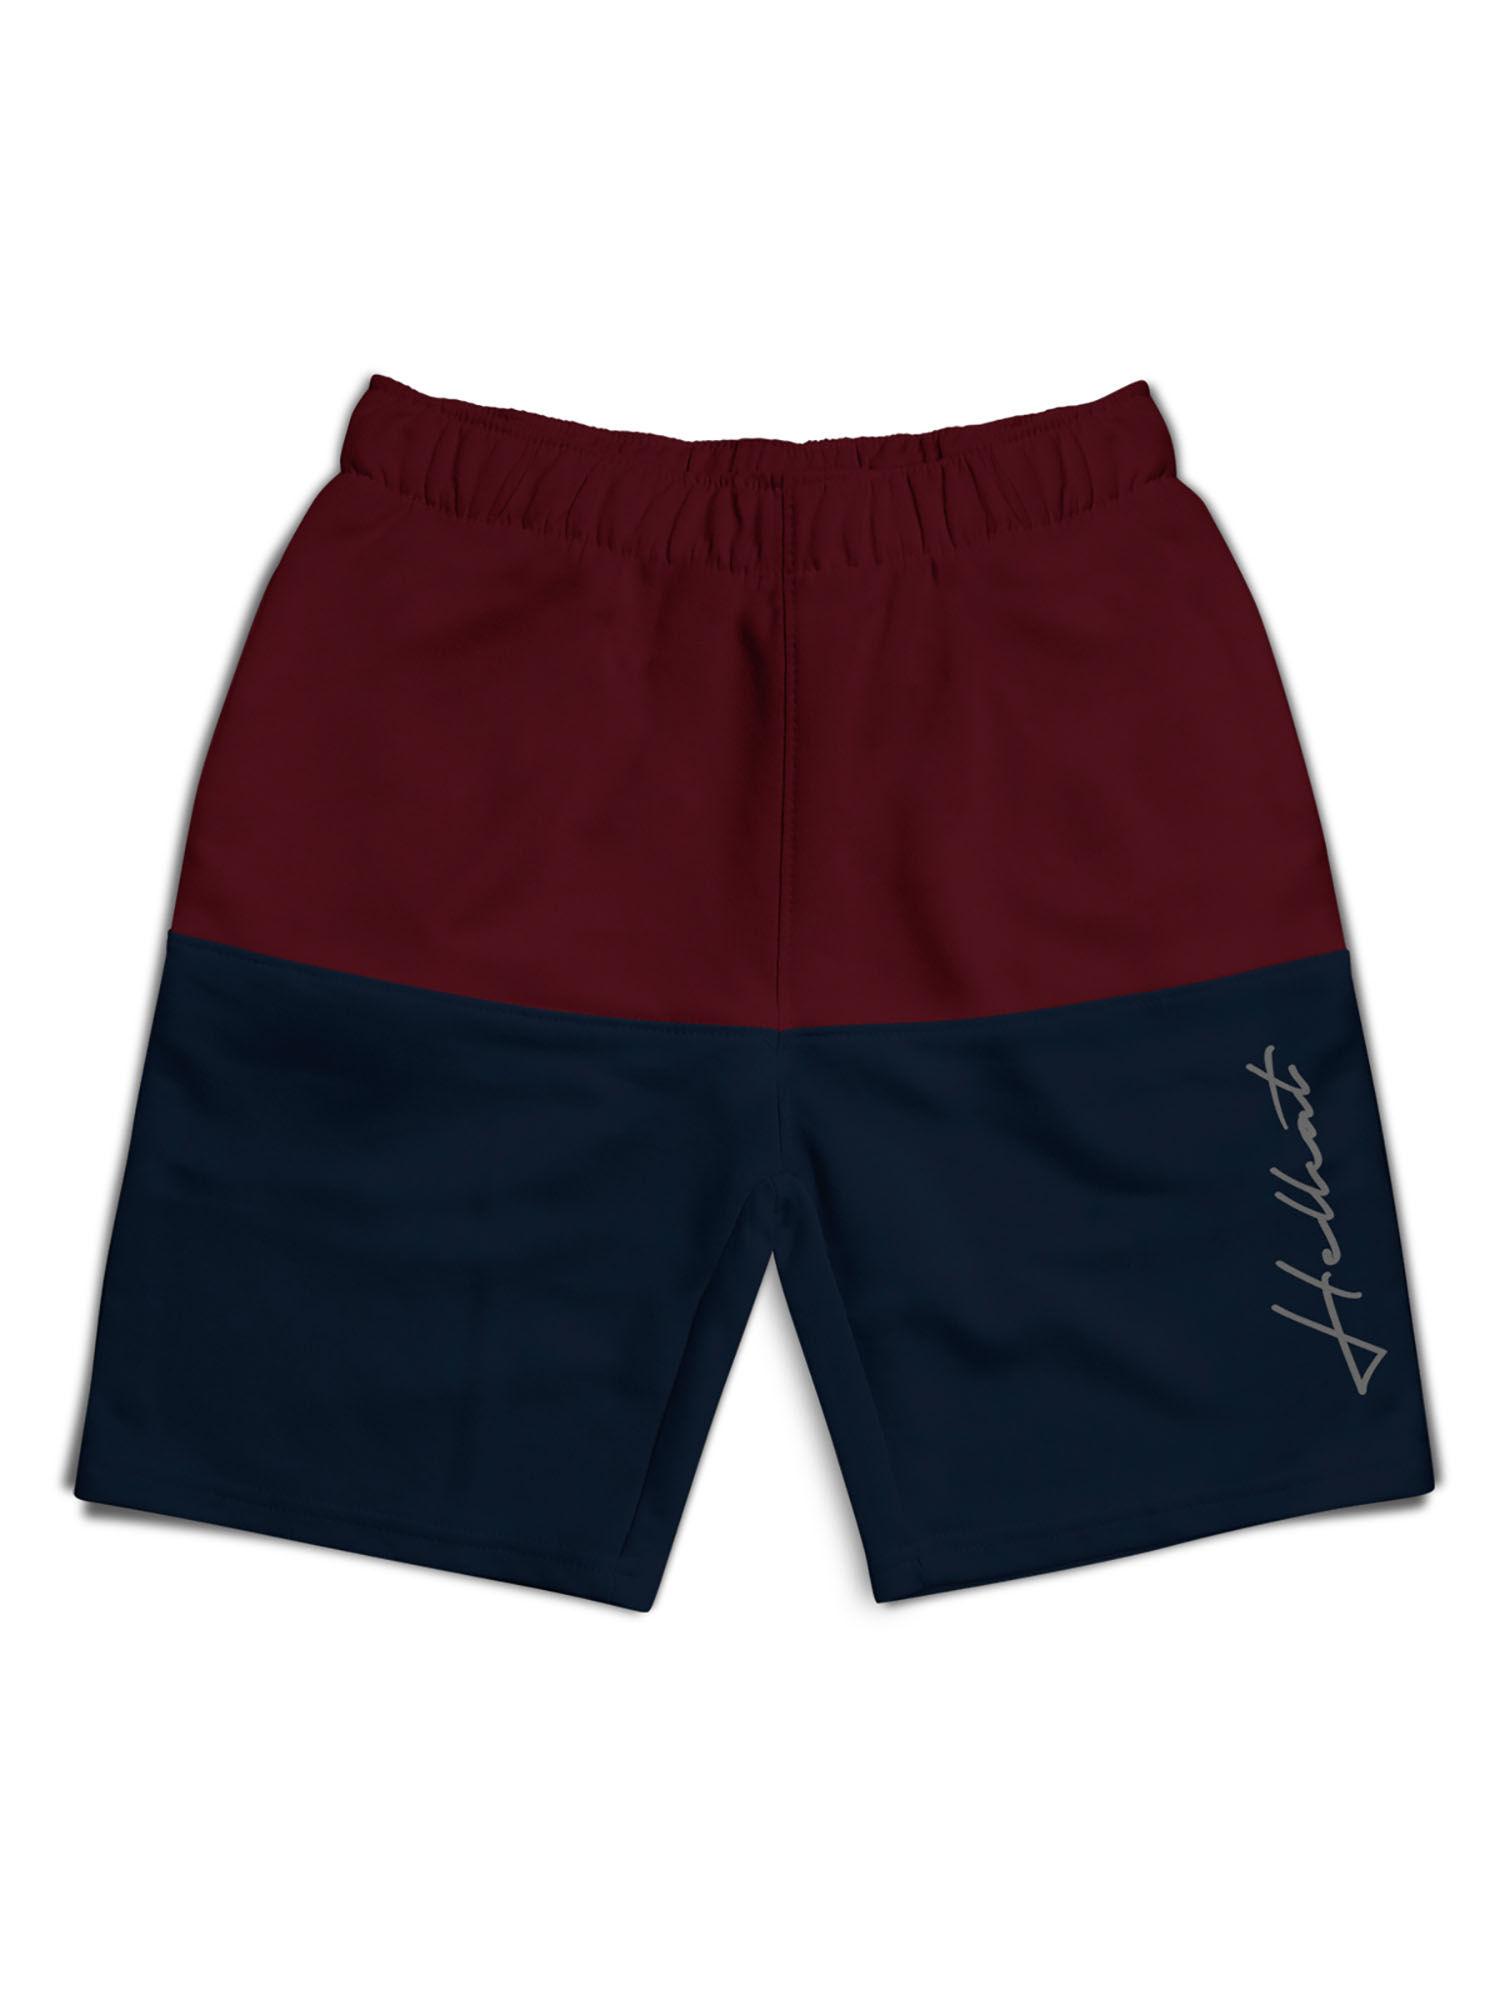 burgundy-colorblocked-mid-rise-shorts-for-boys